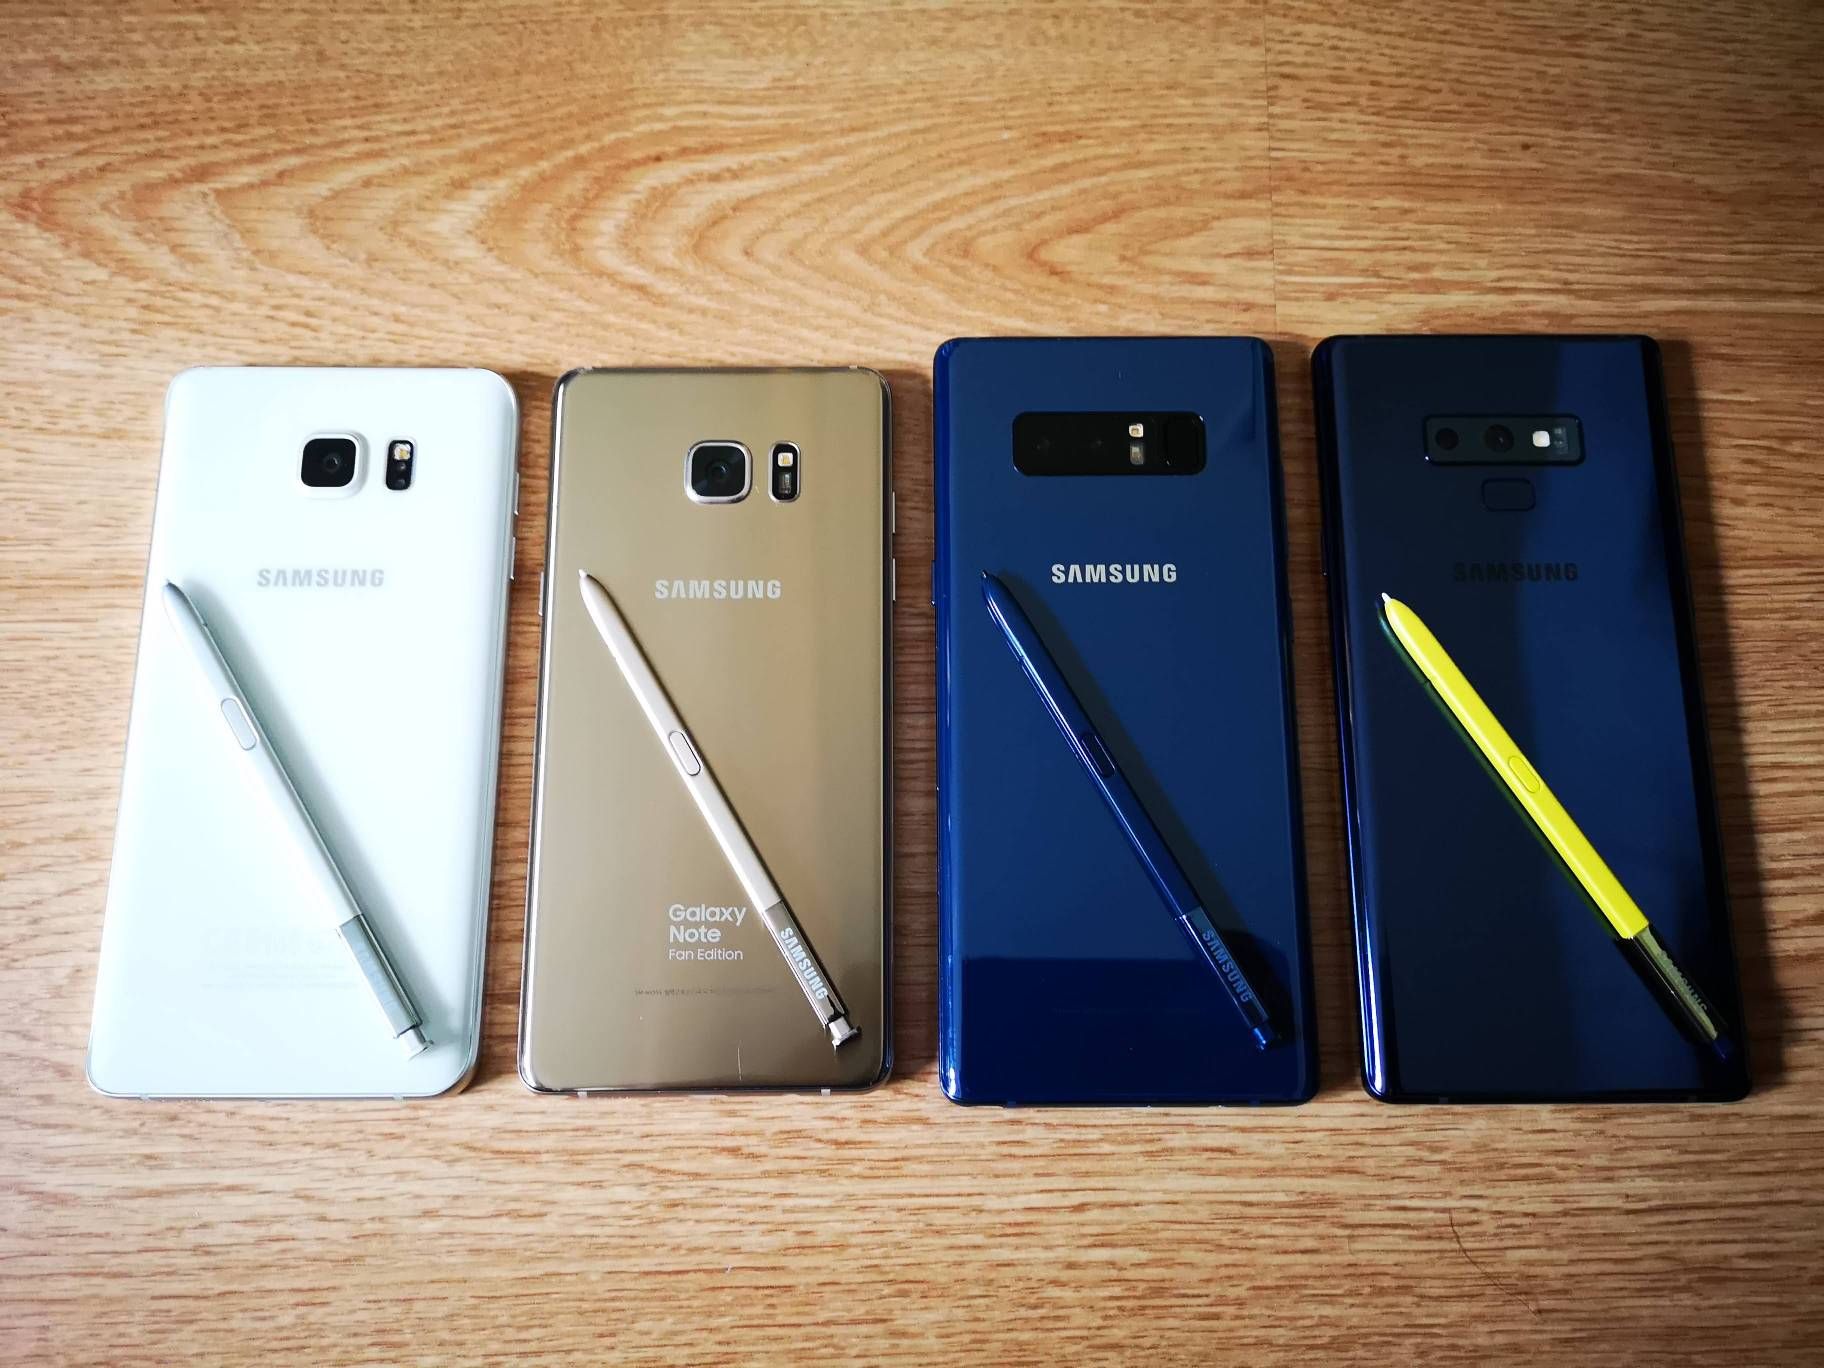 Galaxy Note 7 reconditionné, Samsung lance le Galaxy Note FE